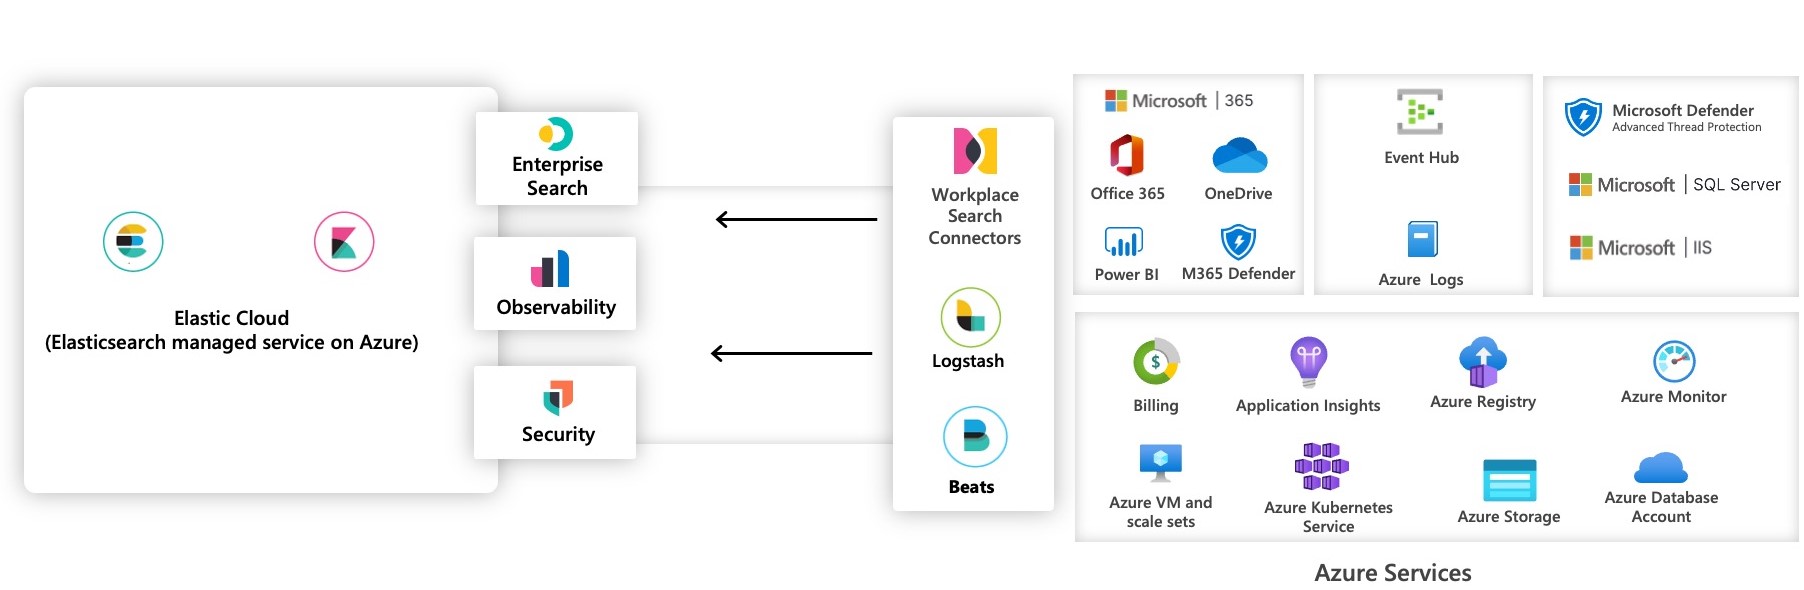 A reference architecture diagram for Elastic Cloud on Azure.